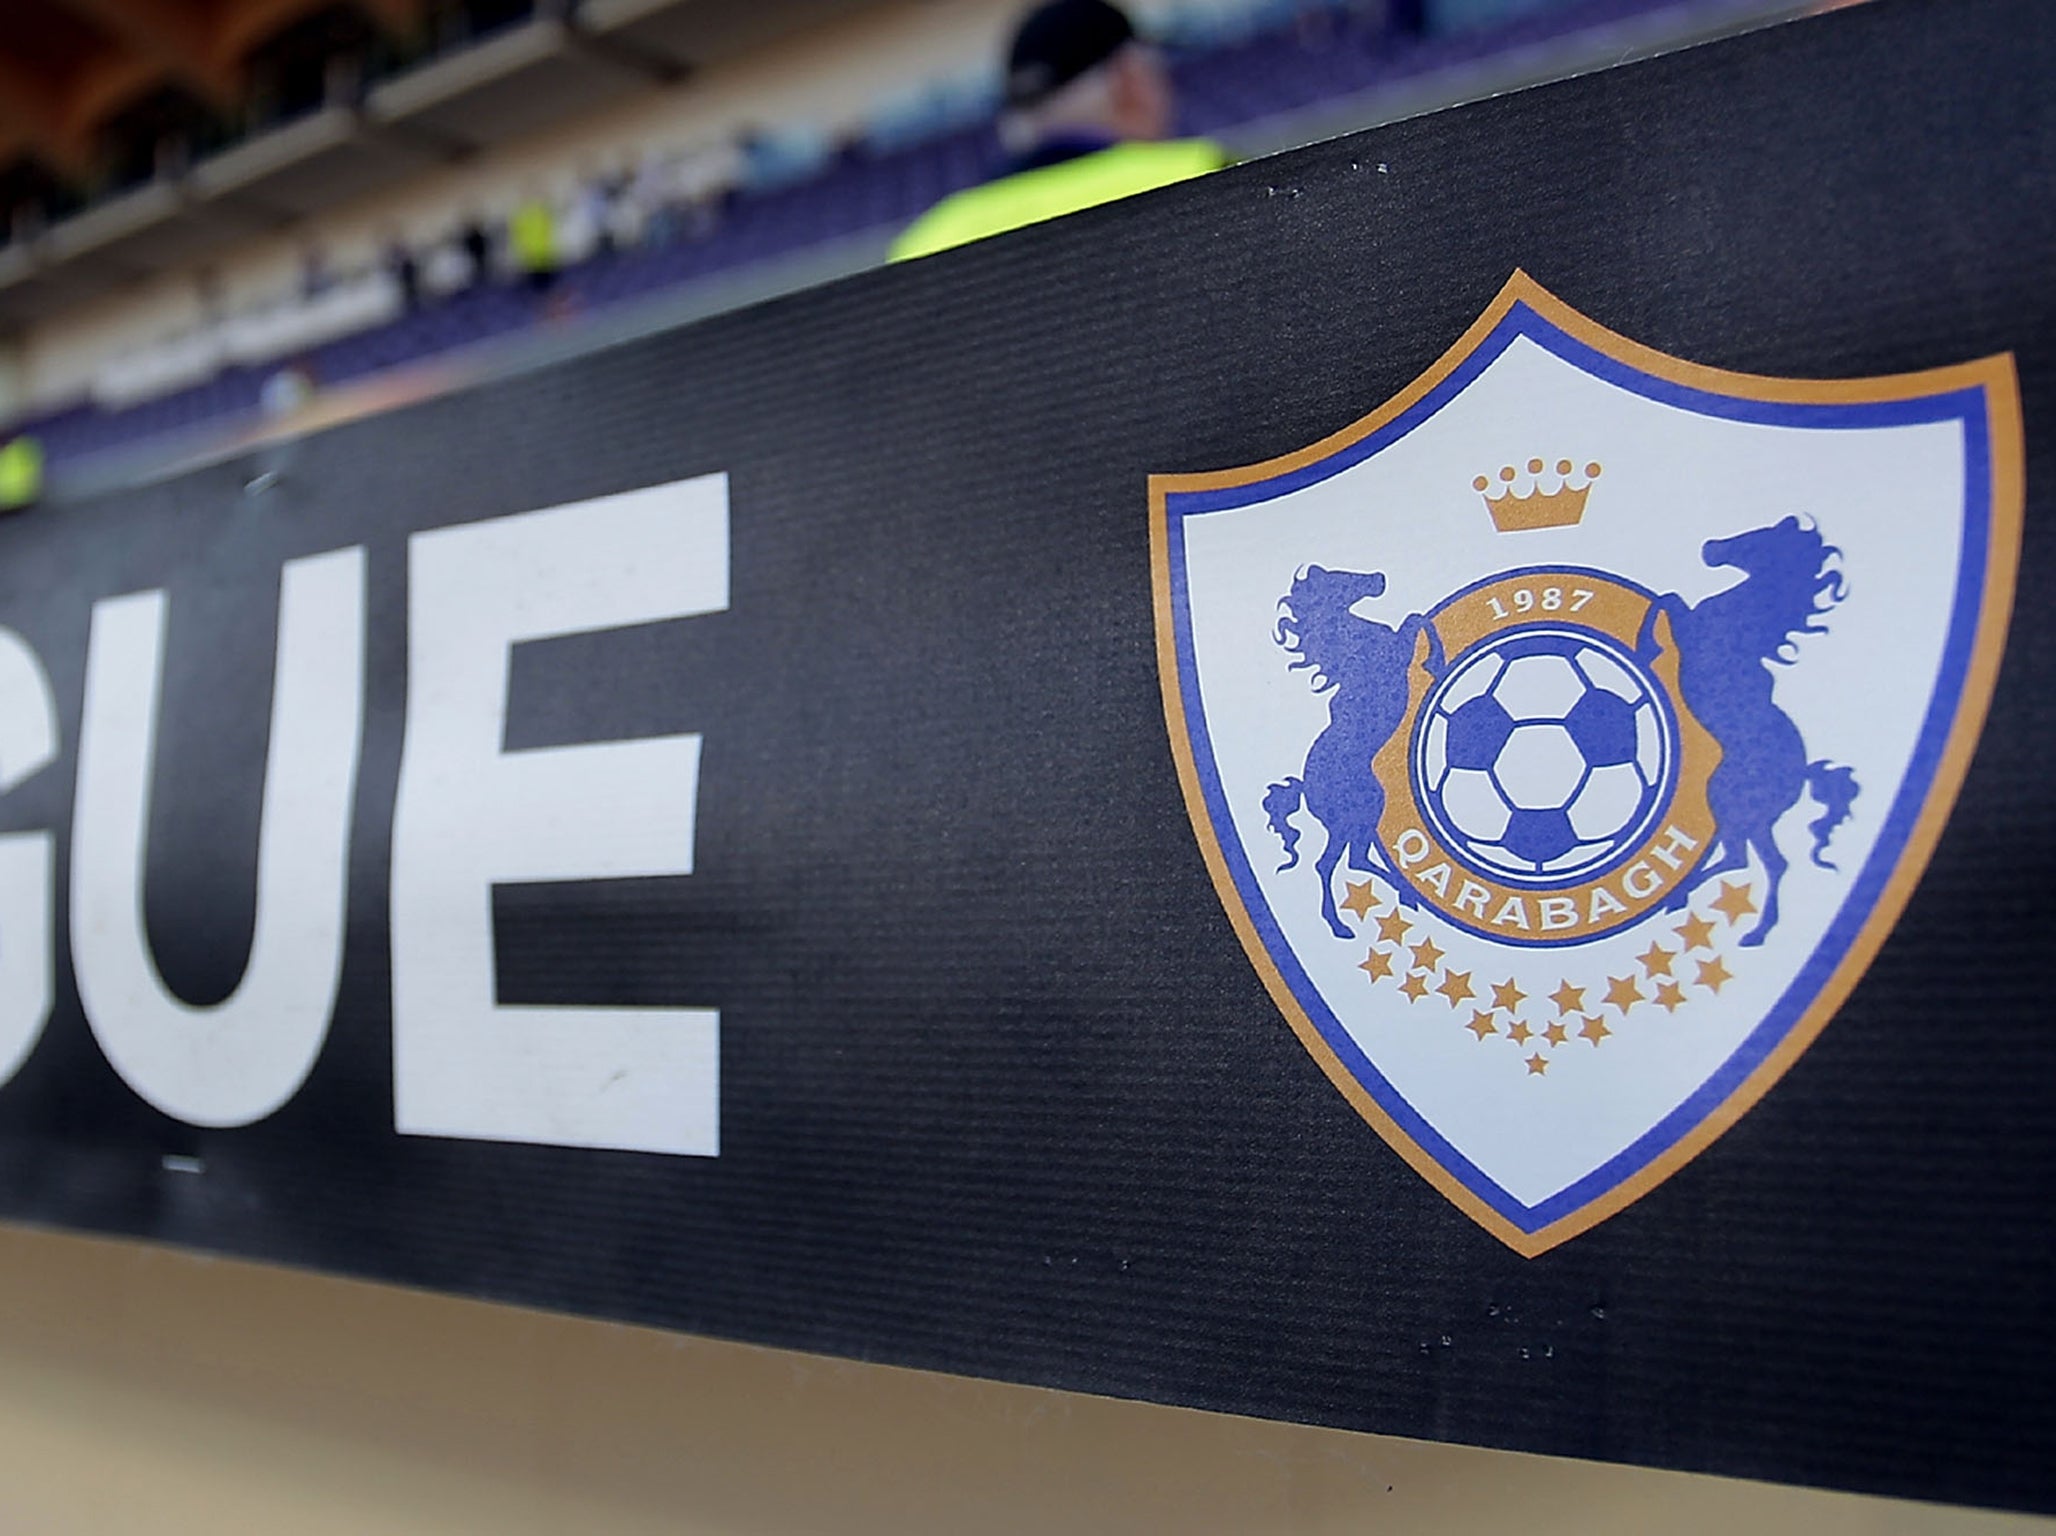 In 2014 Qarabag made it into the Europa League group stage for the first time